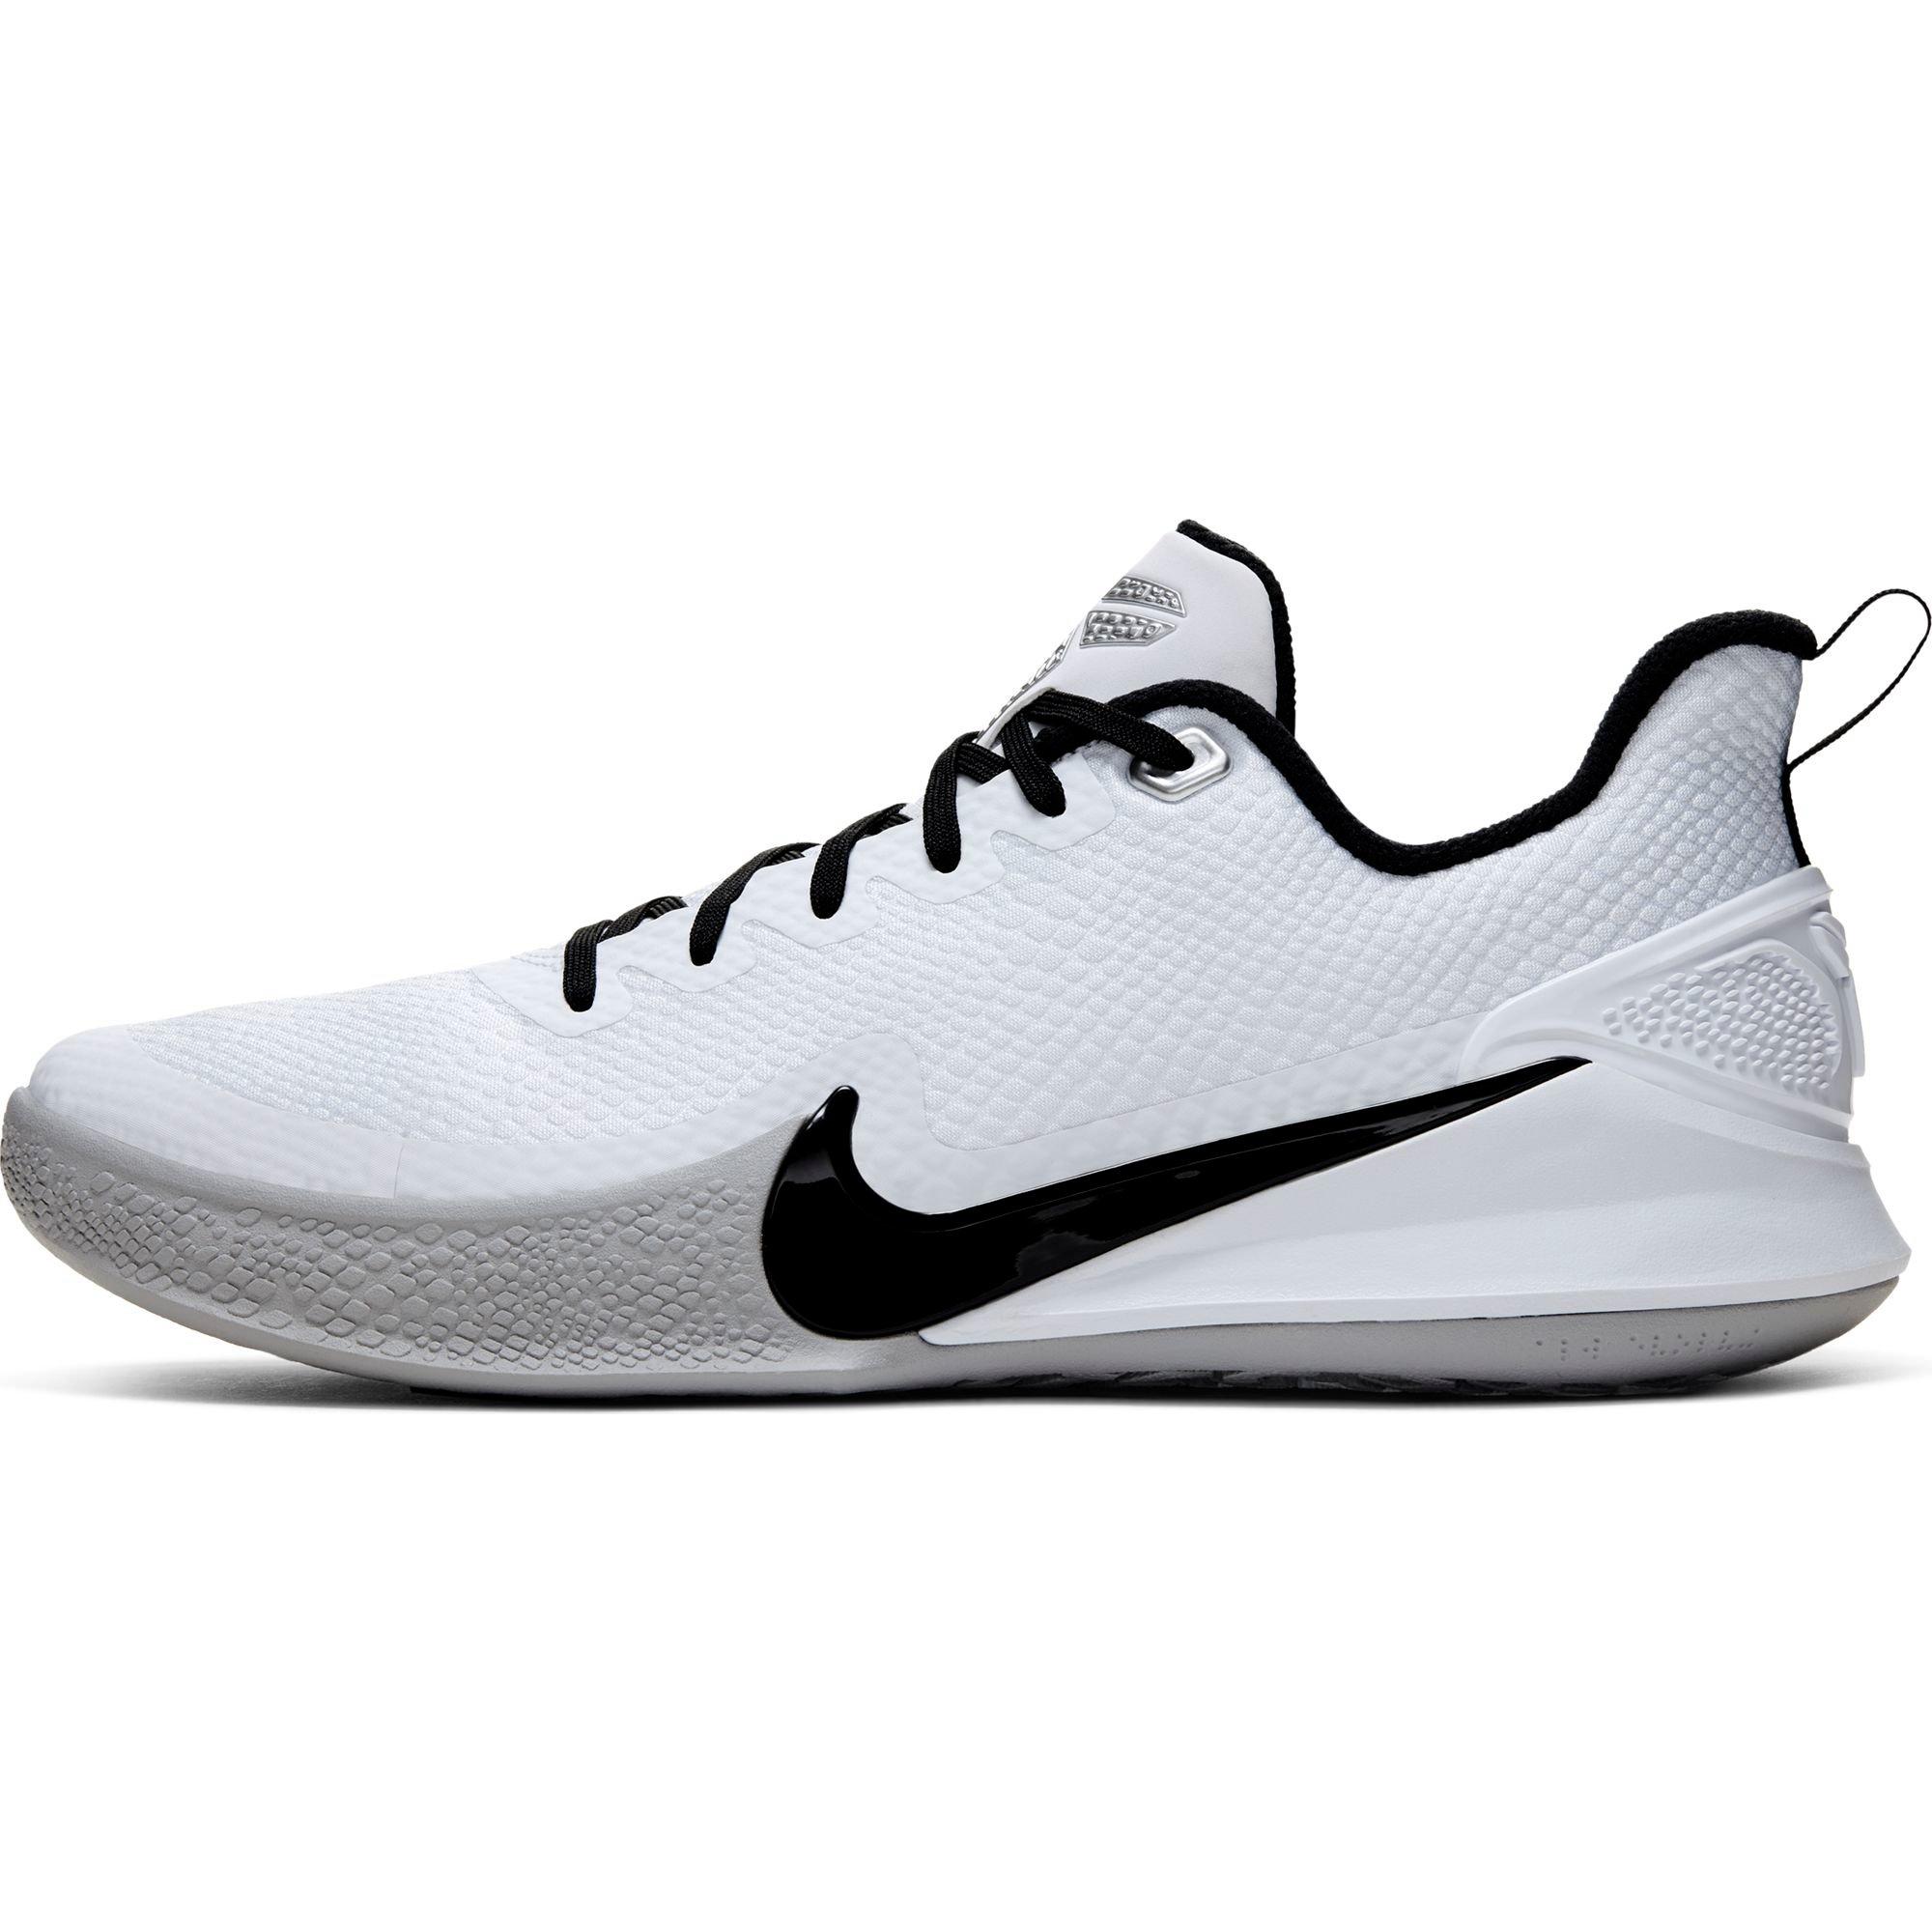 kobe bryant volleyball shoes